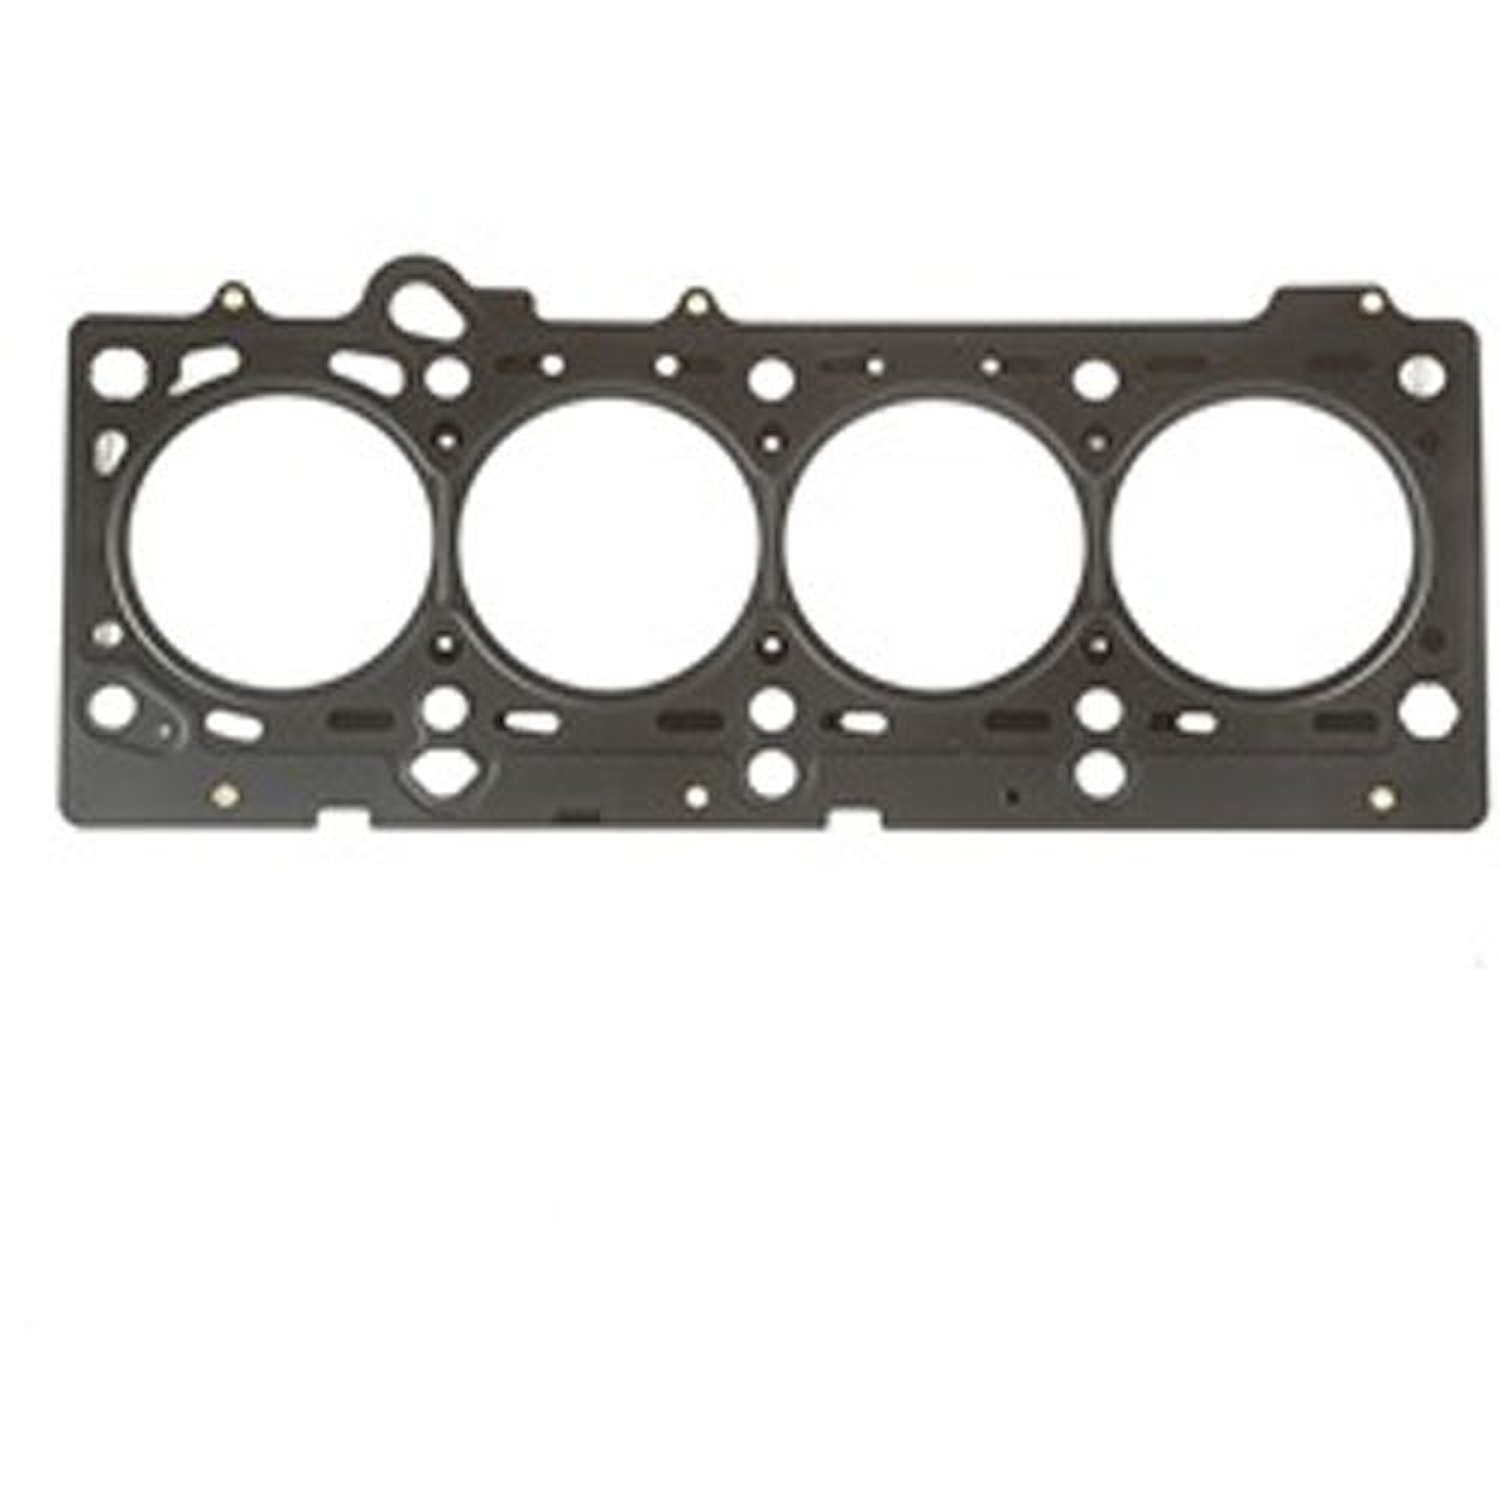 This cylinder head gasket set from Omix-ADA fits 2.4L engines found in 02-05 Jeep Libertys and 03-06 Wranglers.